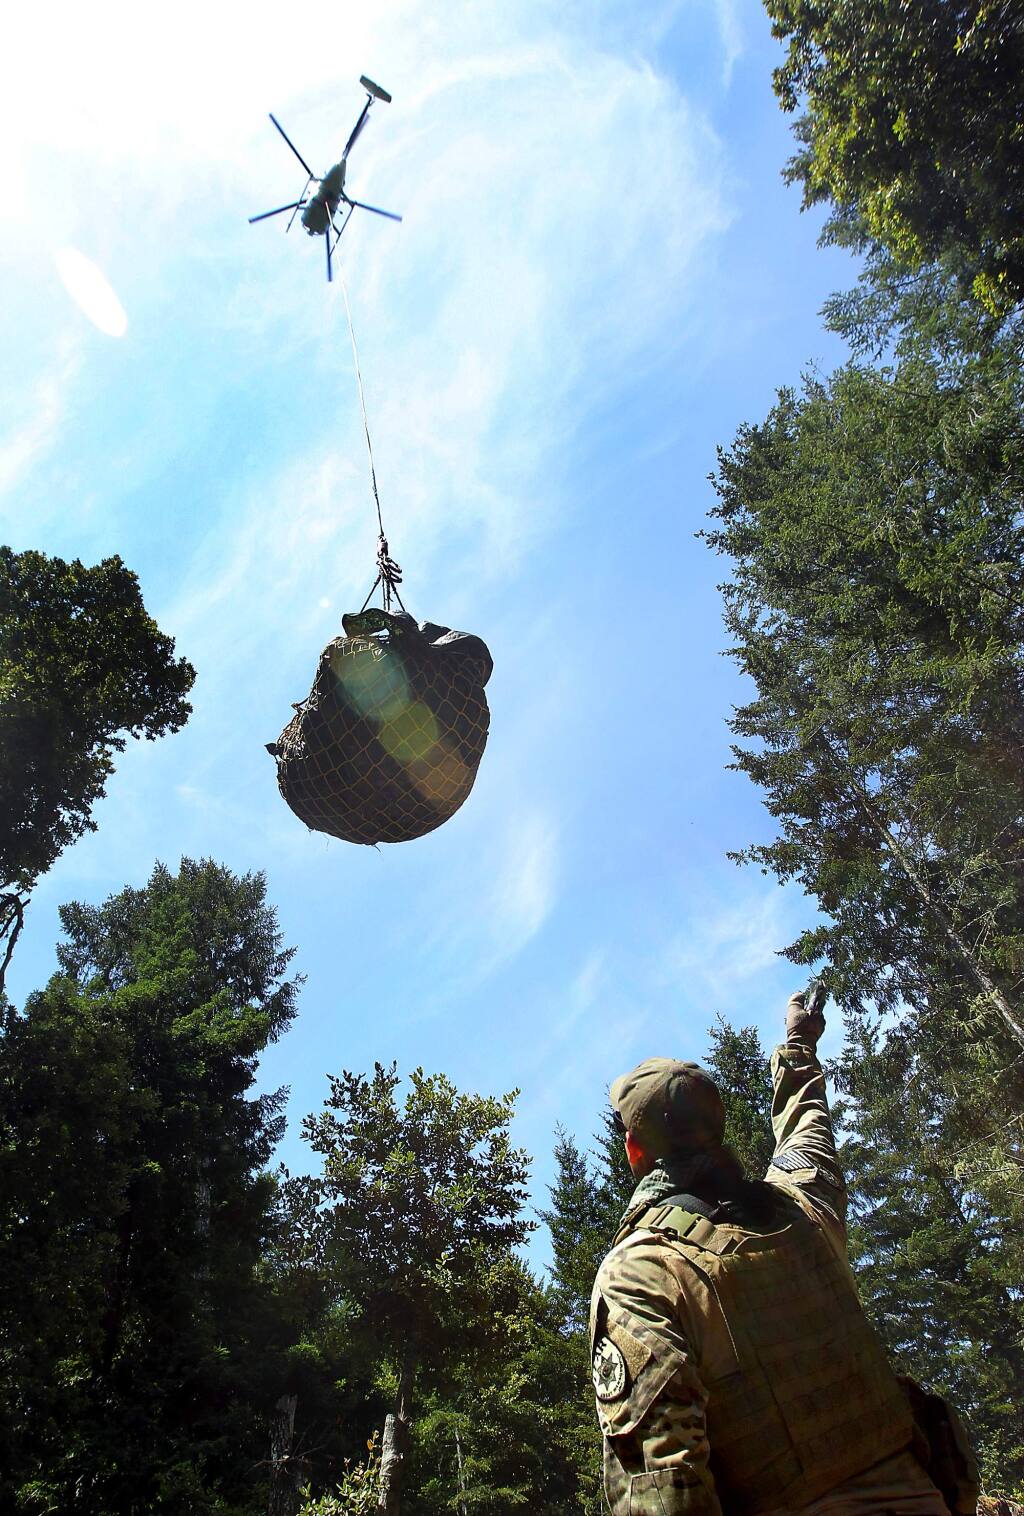 A member of the Lear Asset Management, who refused to give names in fear of retaliation, signals a helicopter leaving with a load of trash taken from a marijuana grow site in the Mendocino Redwood Co. land south of the town of Elk on Saturday, July 19, 2014. (JOHN BURGESS/ PD)